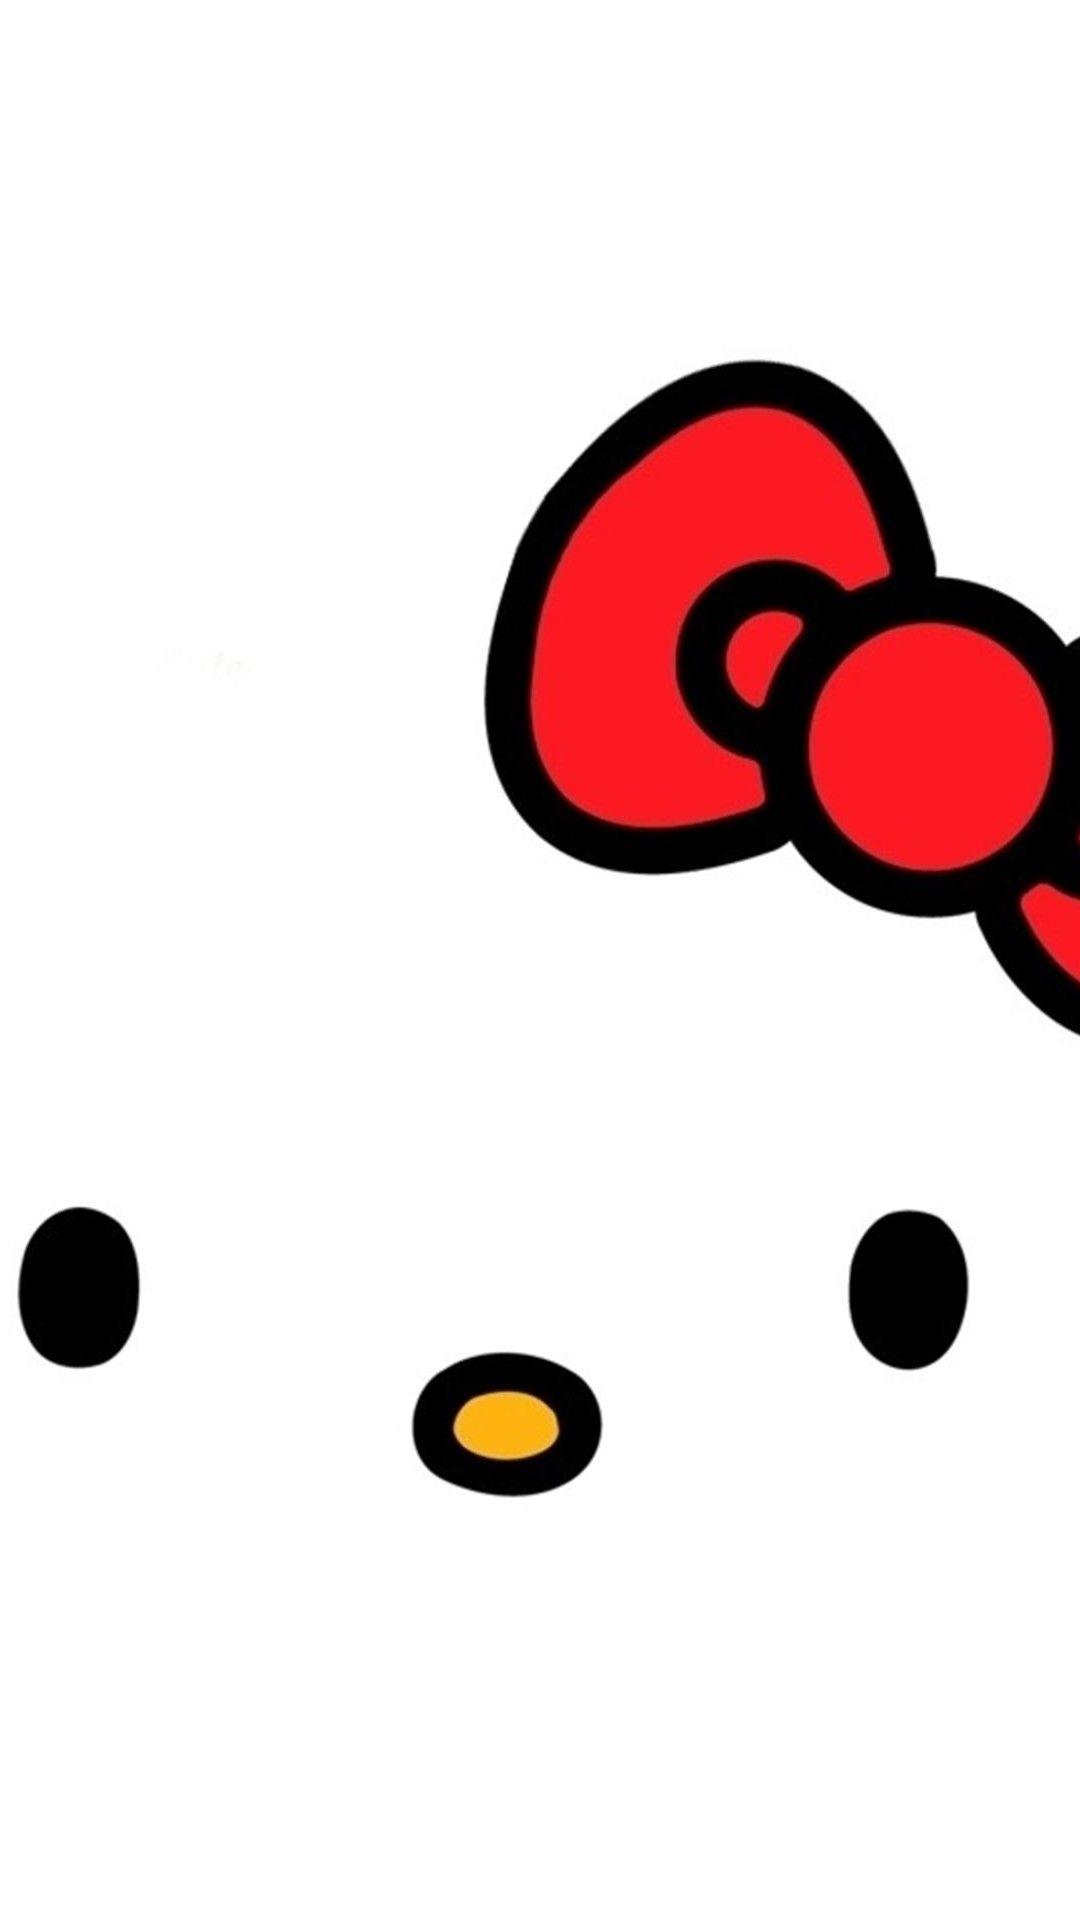 Hello Kitty Minimal Android Wallpaper free download